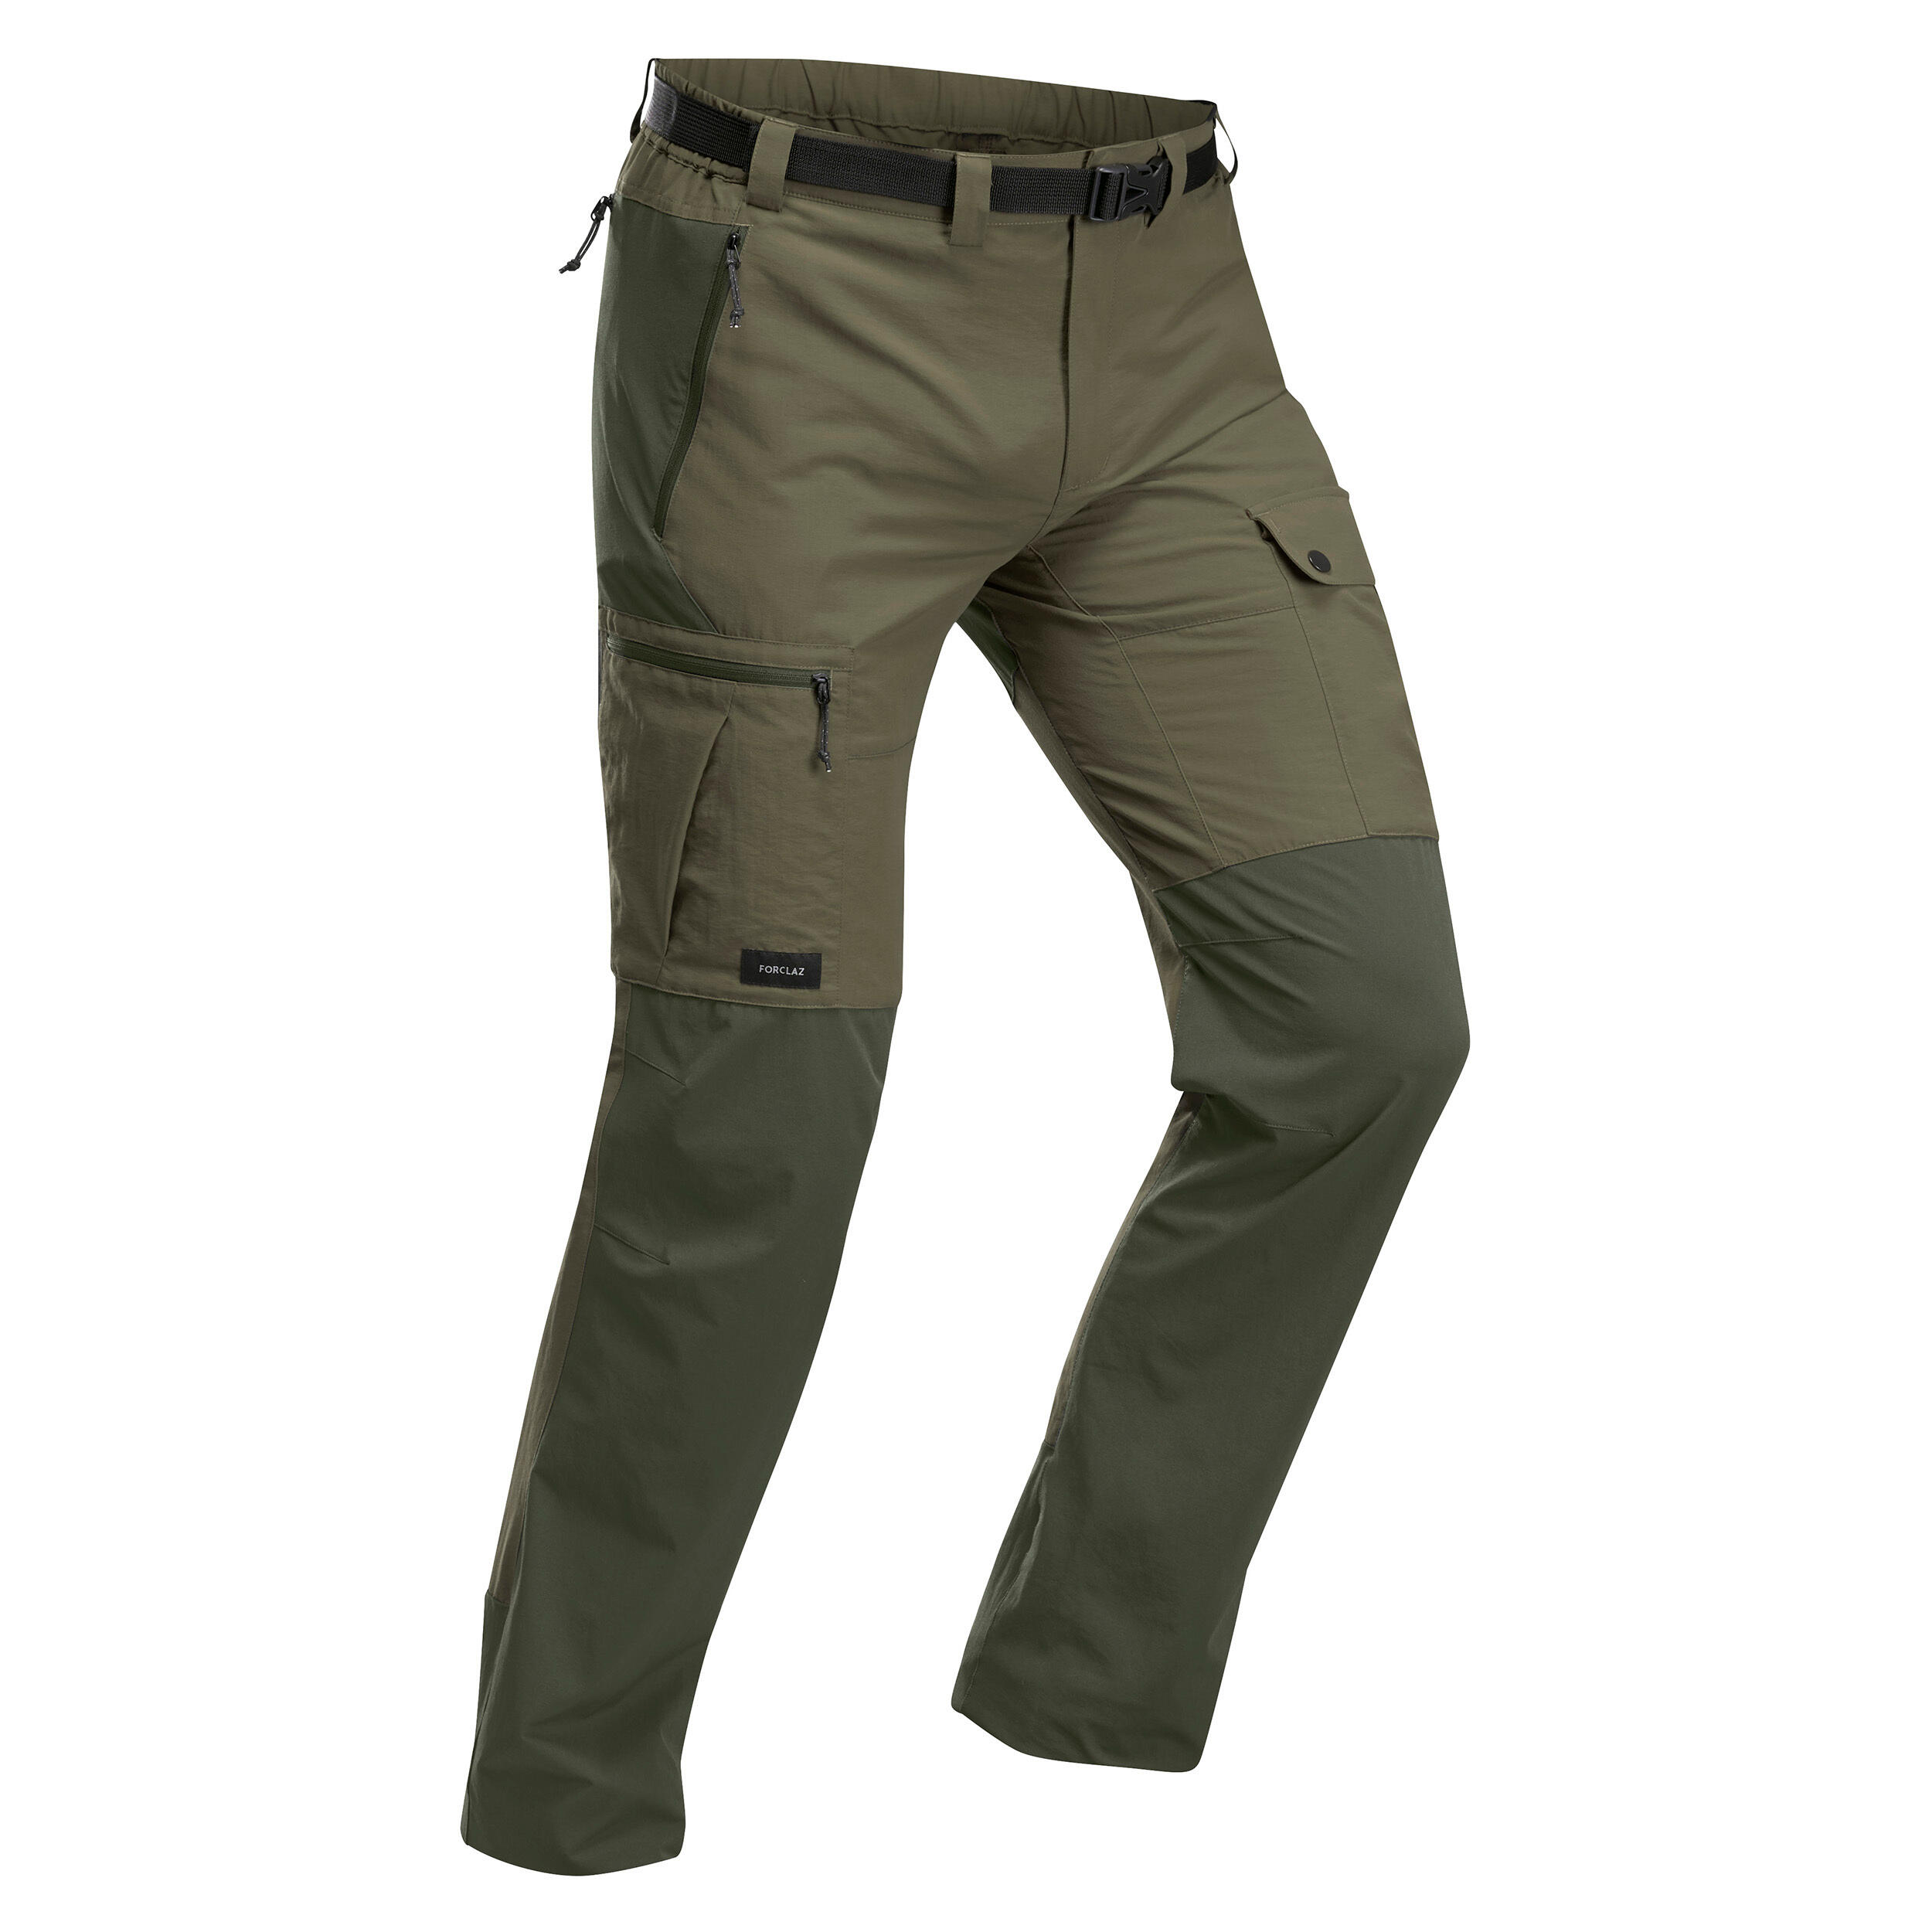 Manali All Weather Trekking Pant – Gokyo Outdoor Clothing & Gear